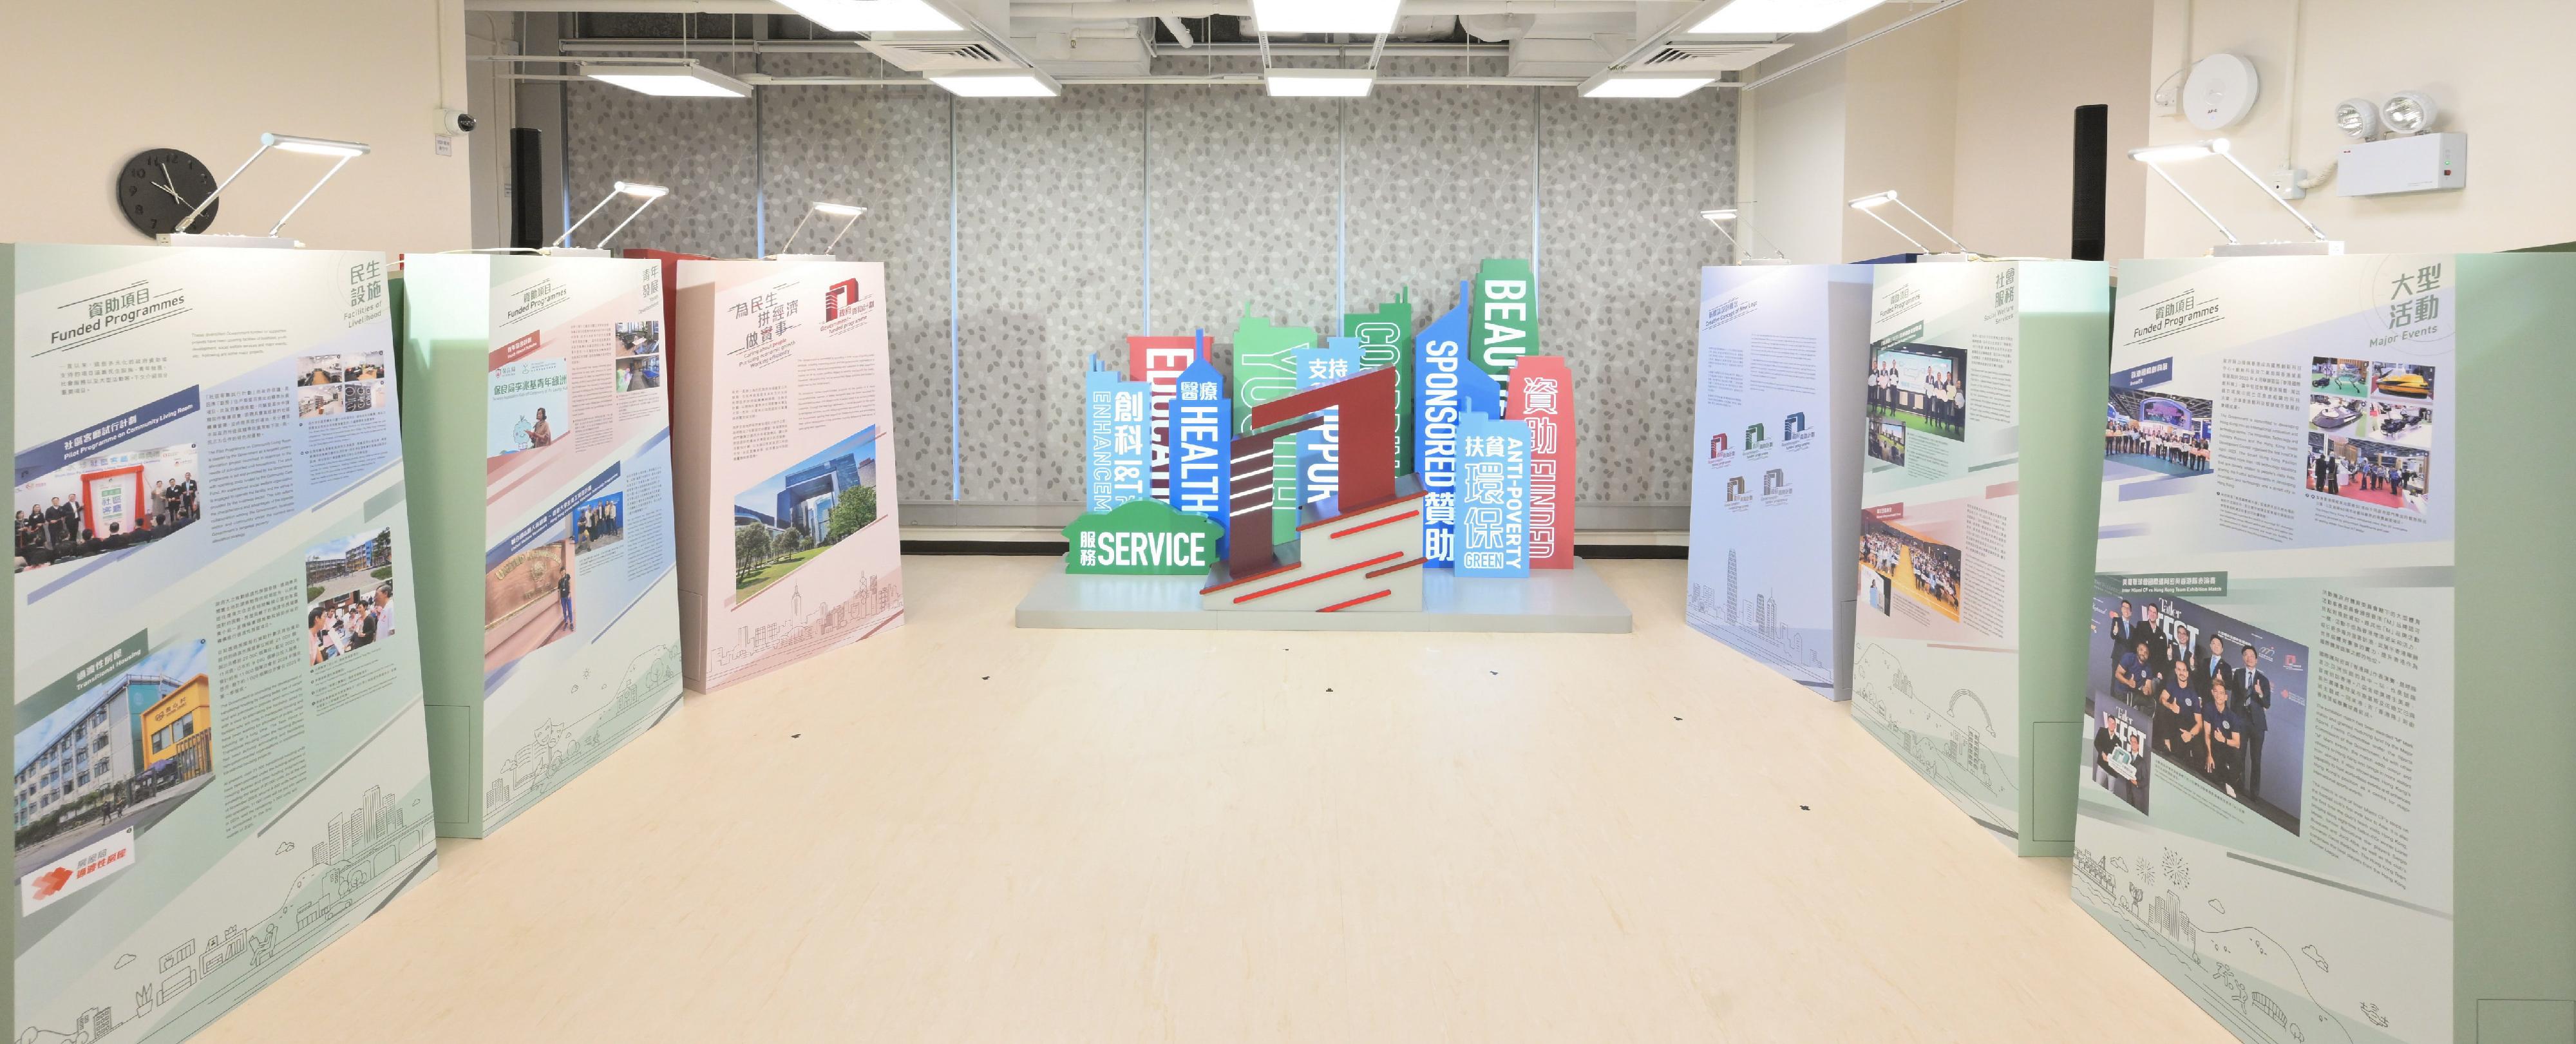 To enhance the publicity of the new promotional logo, the Information Services Department will organise a roving exhibition for staging on Hong Kong Island and in Kowloon and the New Territories from next Monday (January 22) to March 26.